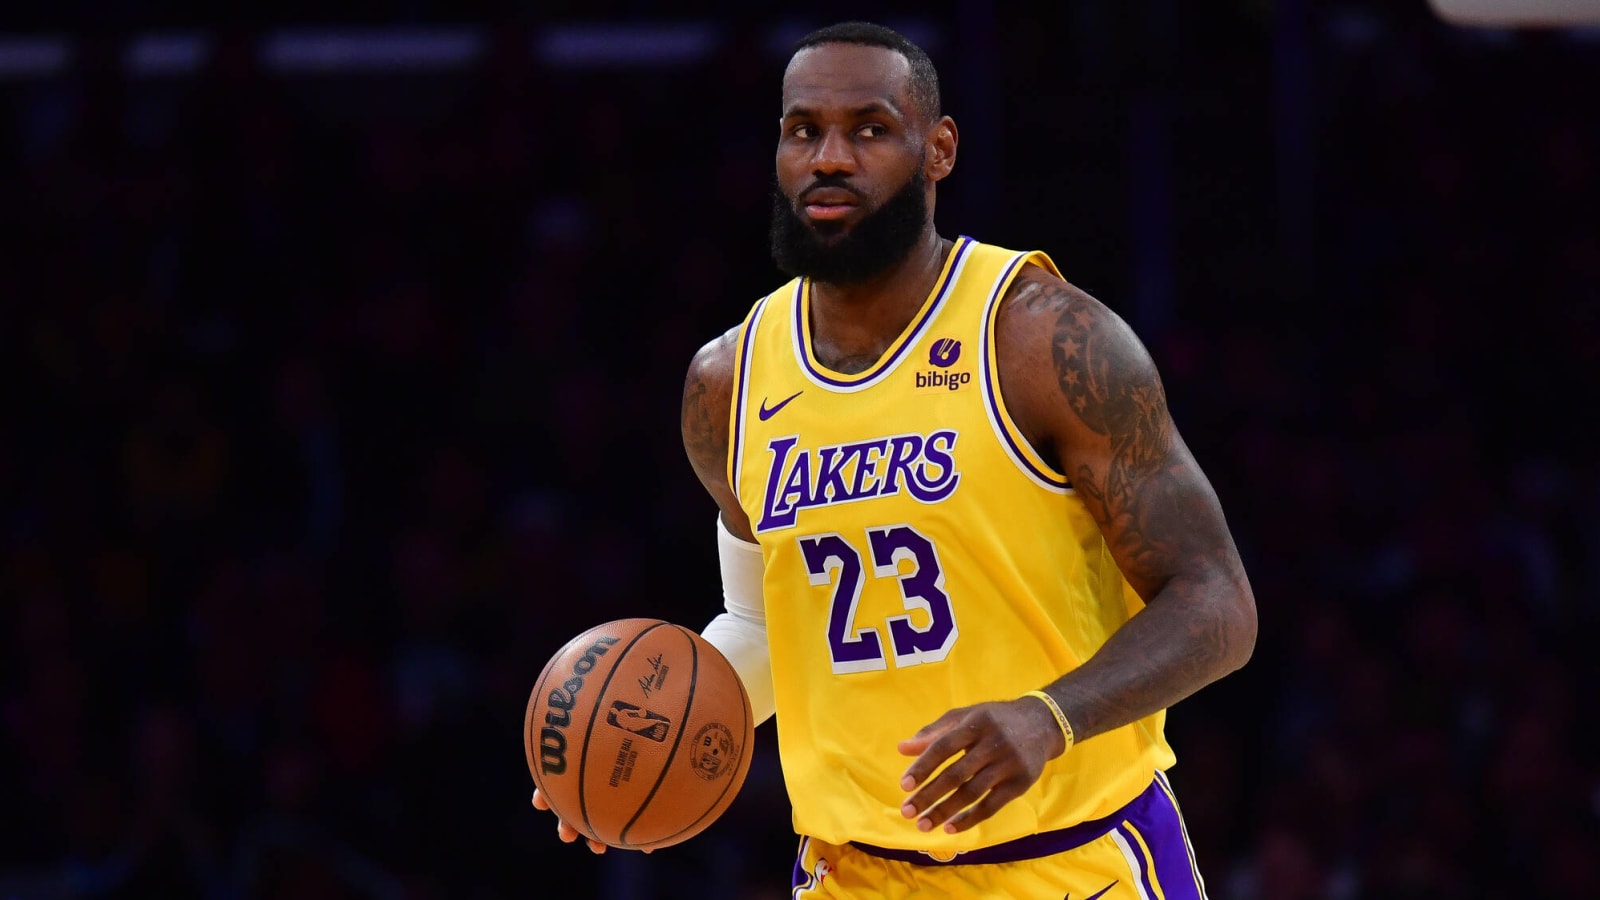 LeBron James launching podcast with former rival player